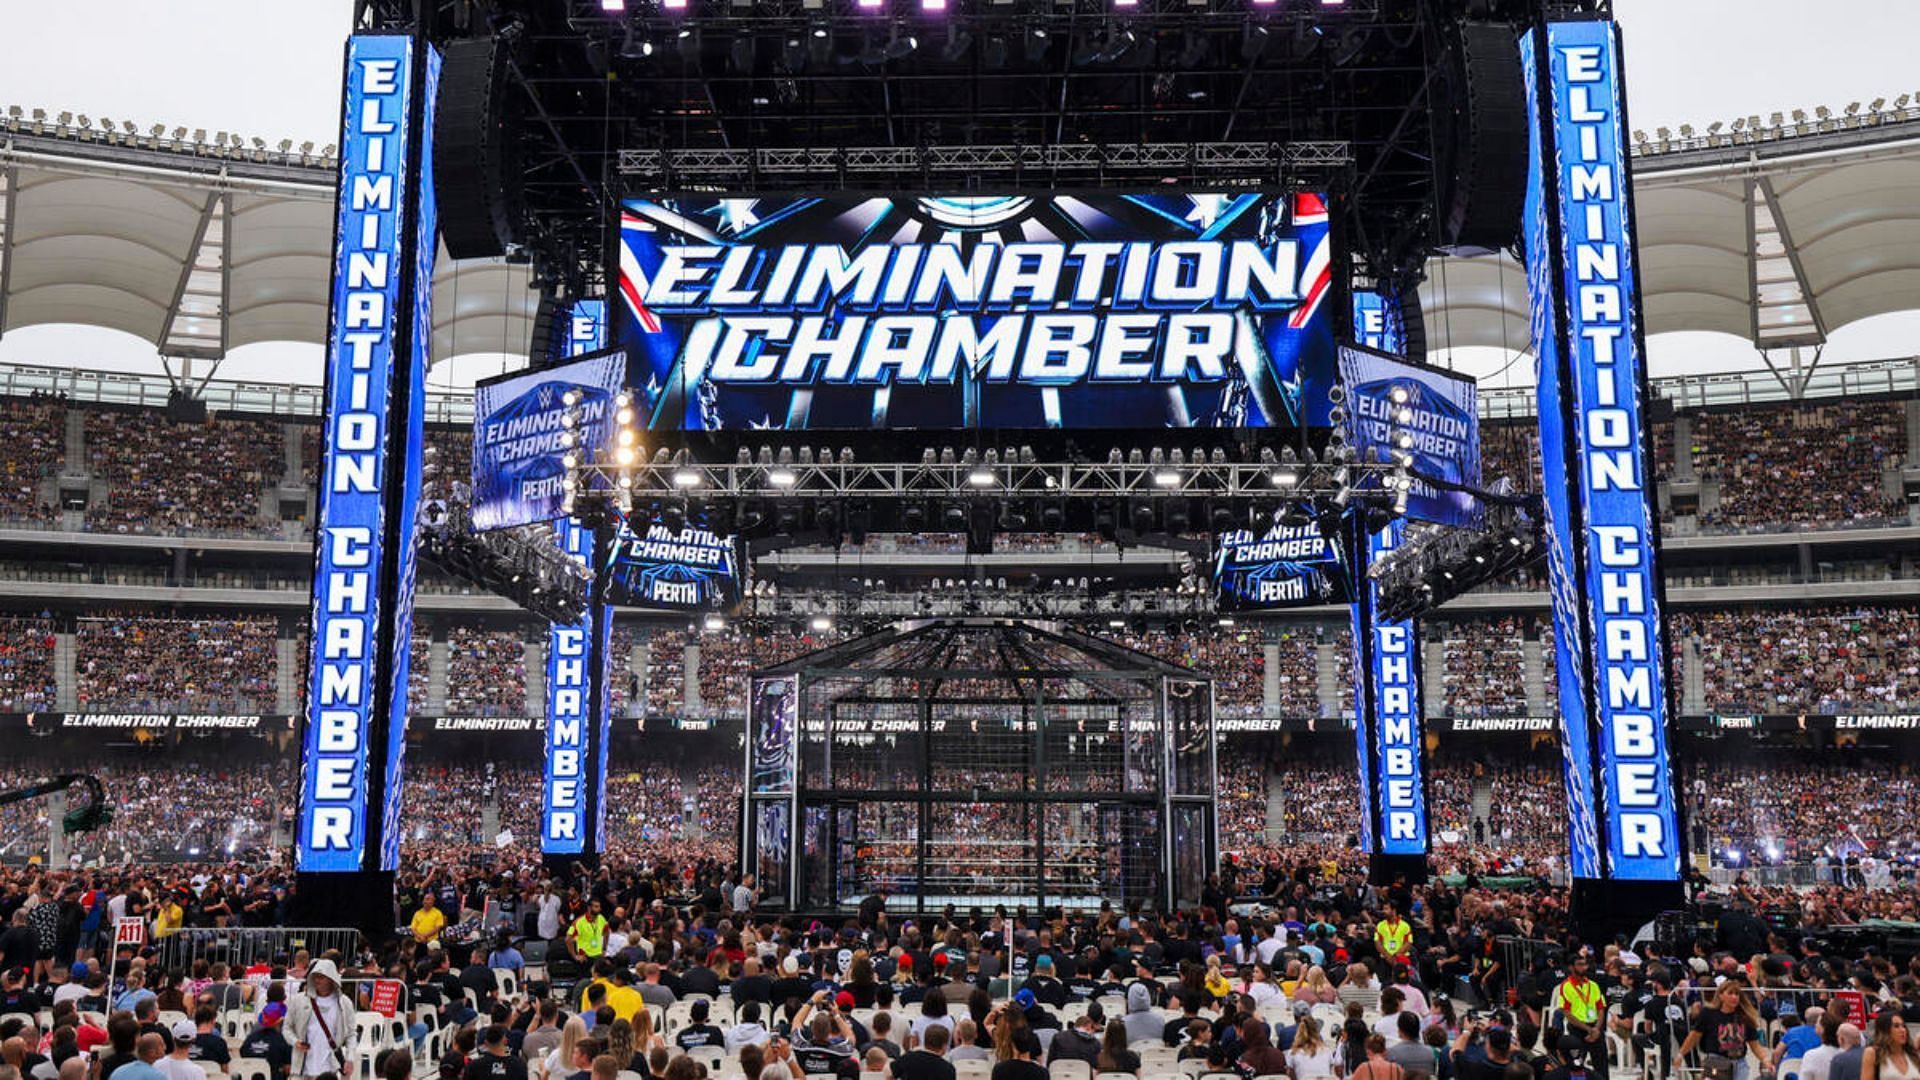 Elimination Chamber: Perth was a memorable PLE